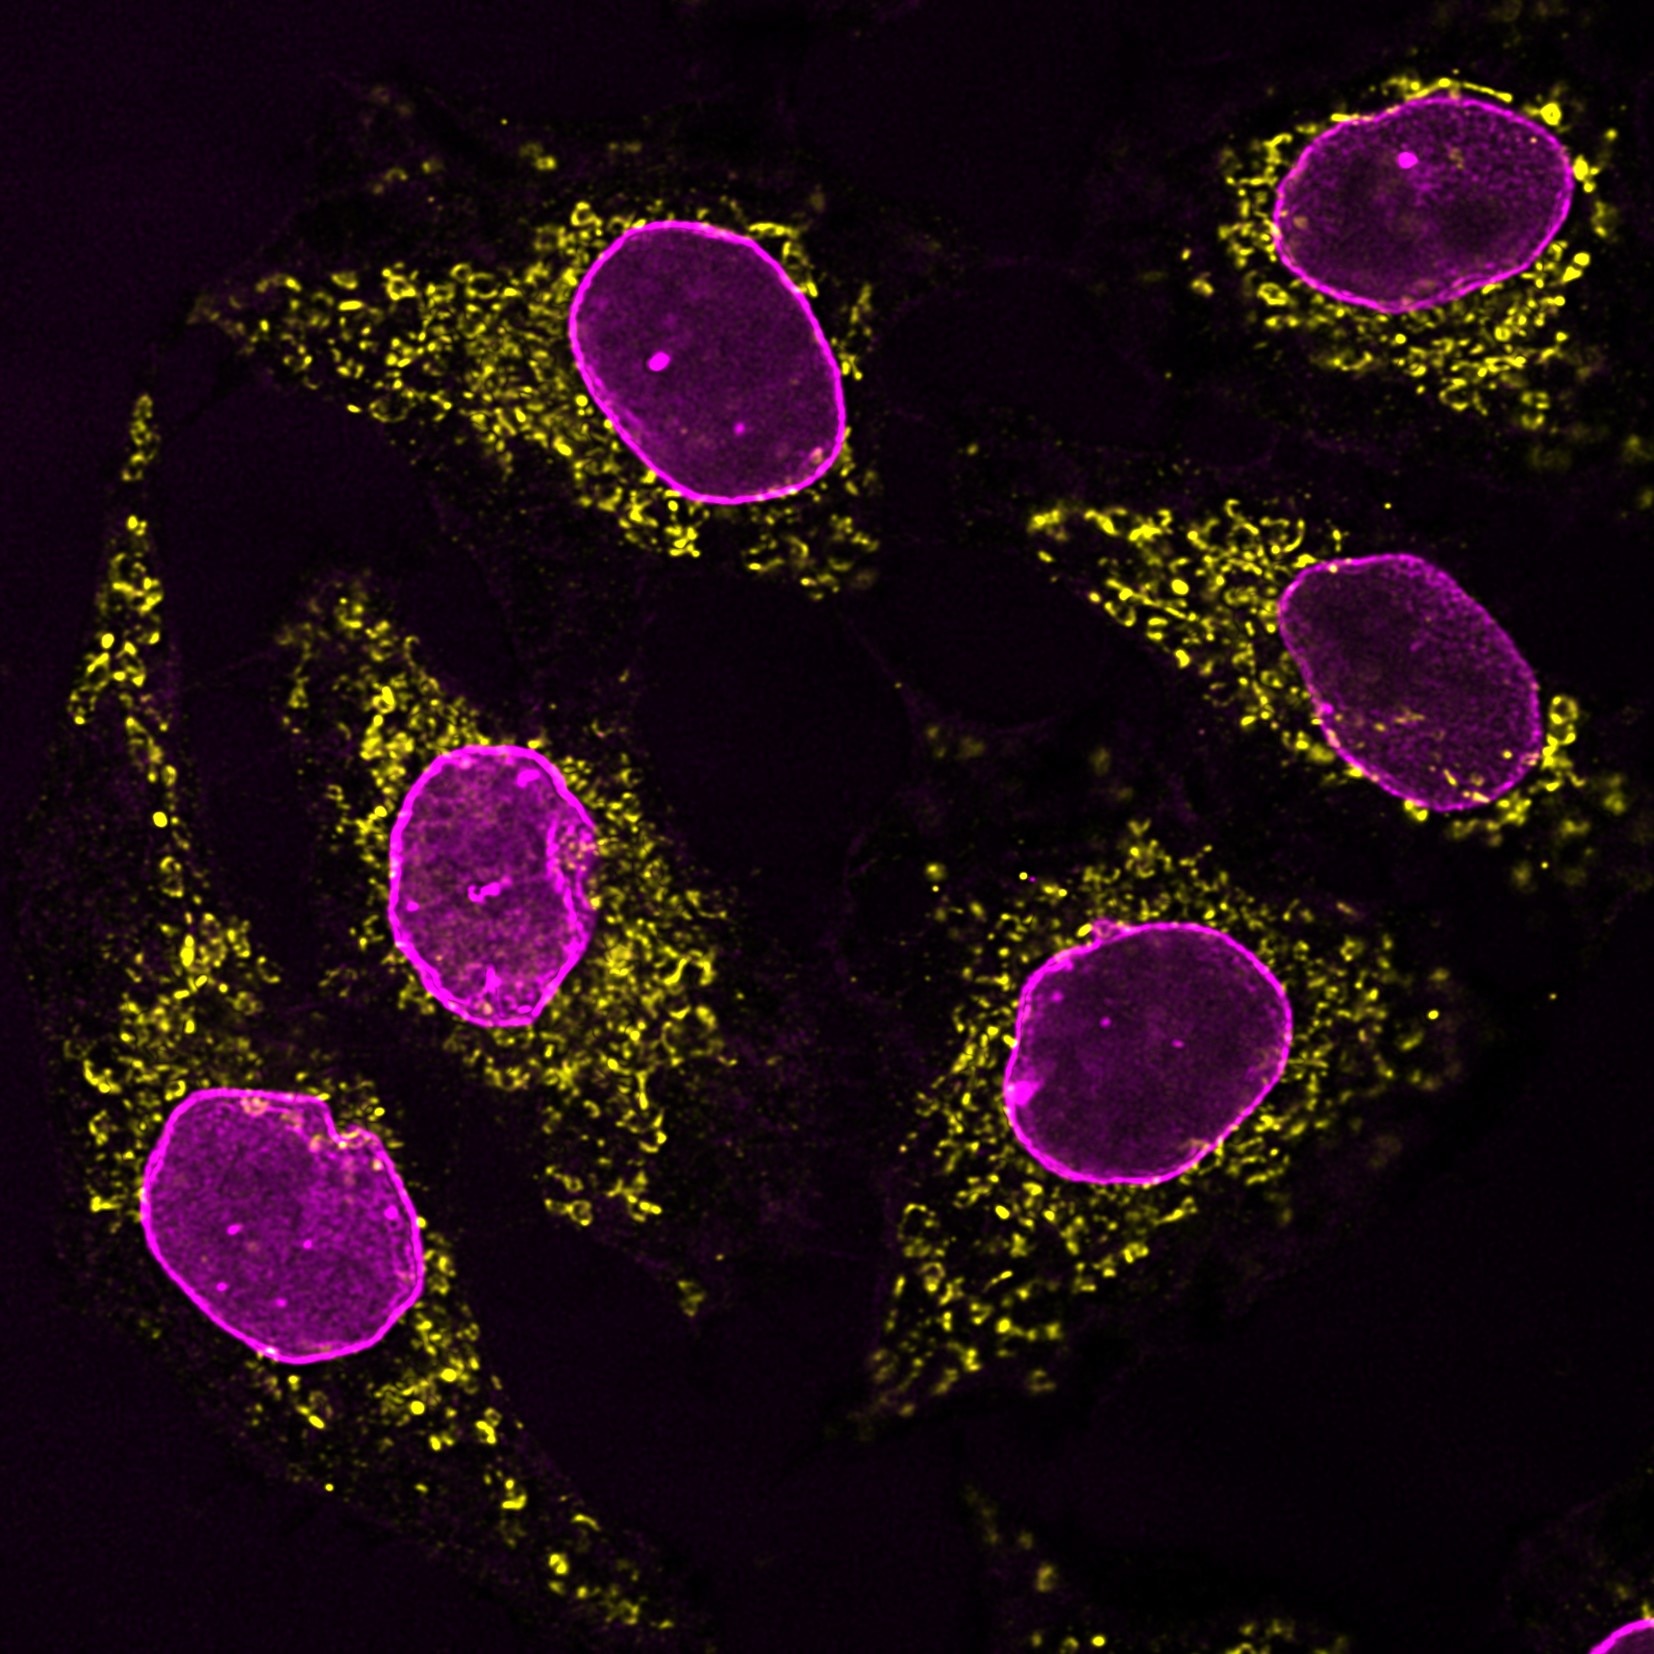 Immunofluorescence analysis of HeLa cells co-stained with mouse IgG1 anti-HSP60 antibody (66041-1-Ig) and mouse IgG2b anti-Lamin A/C antibody followed by Nano-Secondary® alpaca anti-mouse IgG1, recombinant VHH, CoraLite® Plus 555 (smsG1CL555-1, yellow) and Nano-Secondary® alpaca anti-mouse IgG2b, recombinant VHH, CoraLite® Plus 647 (smsG1CL647-1, magenta).